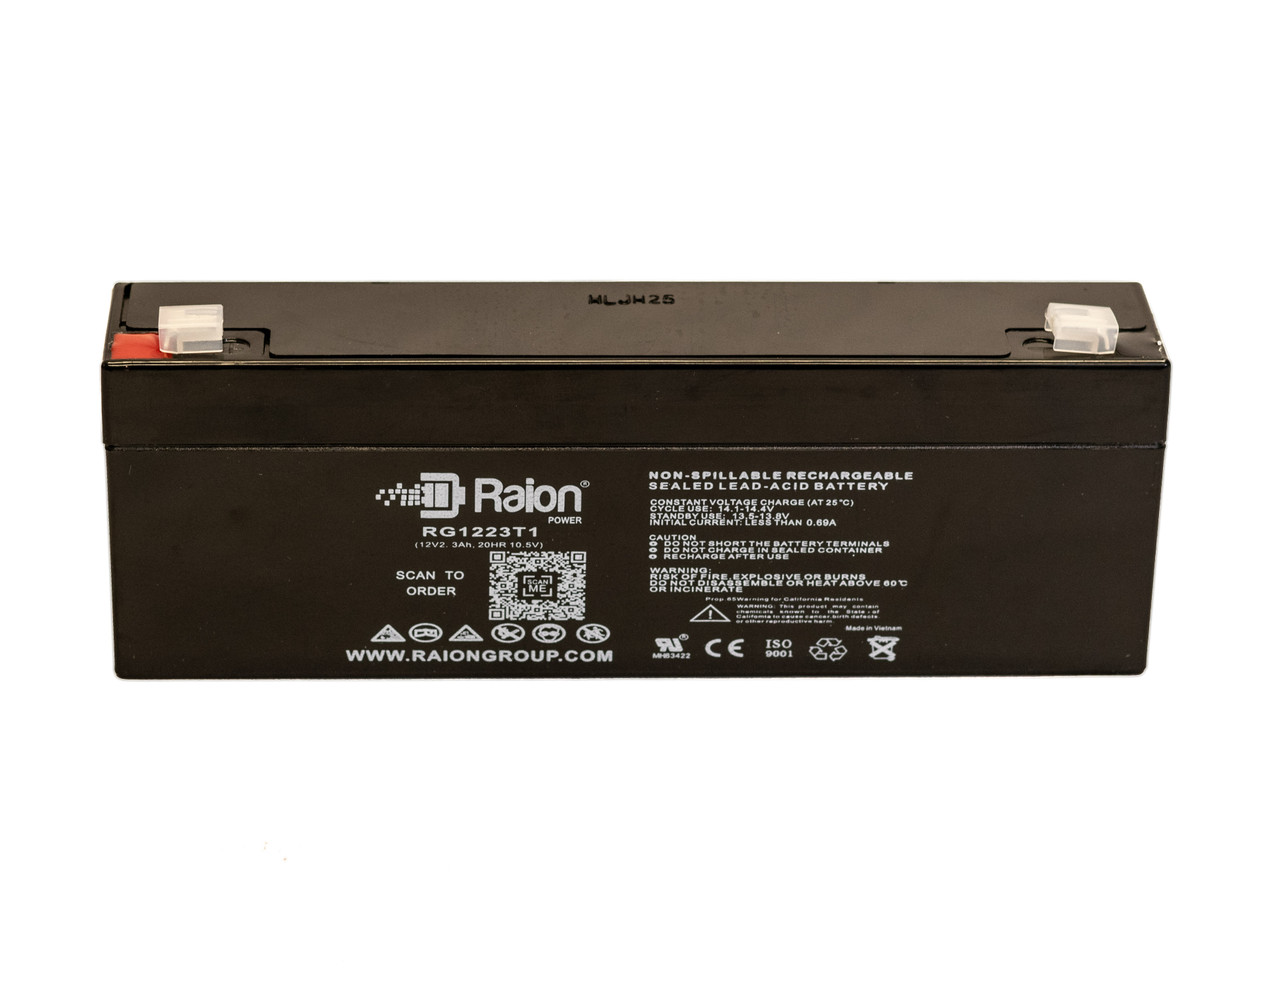 Raion Power 12V 2.3Ah SLA Battery With T1 Terminals For Henley International 464 Sono Pulse Ultrasound